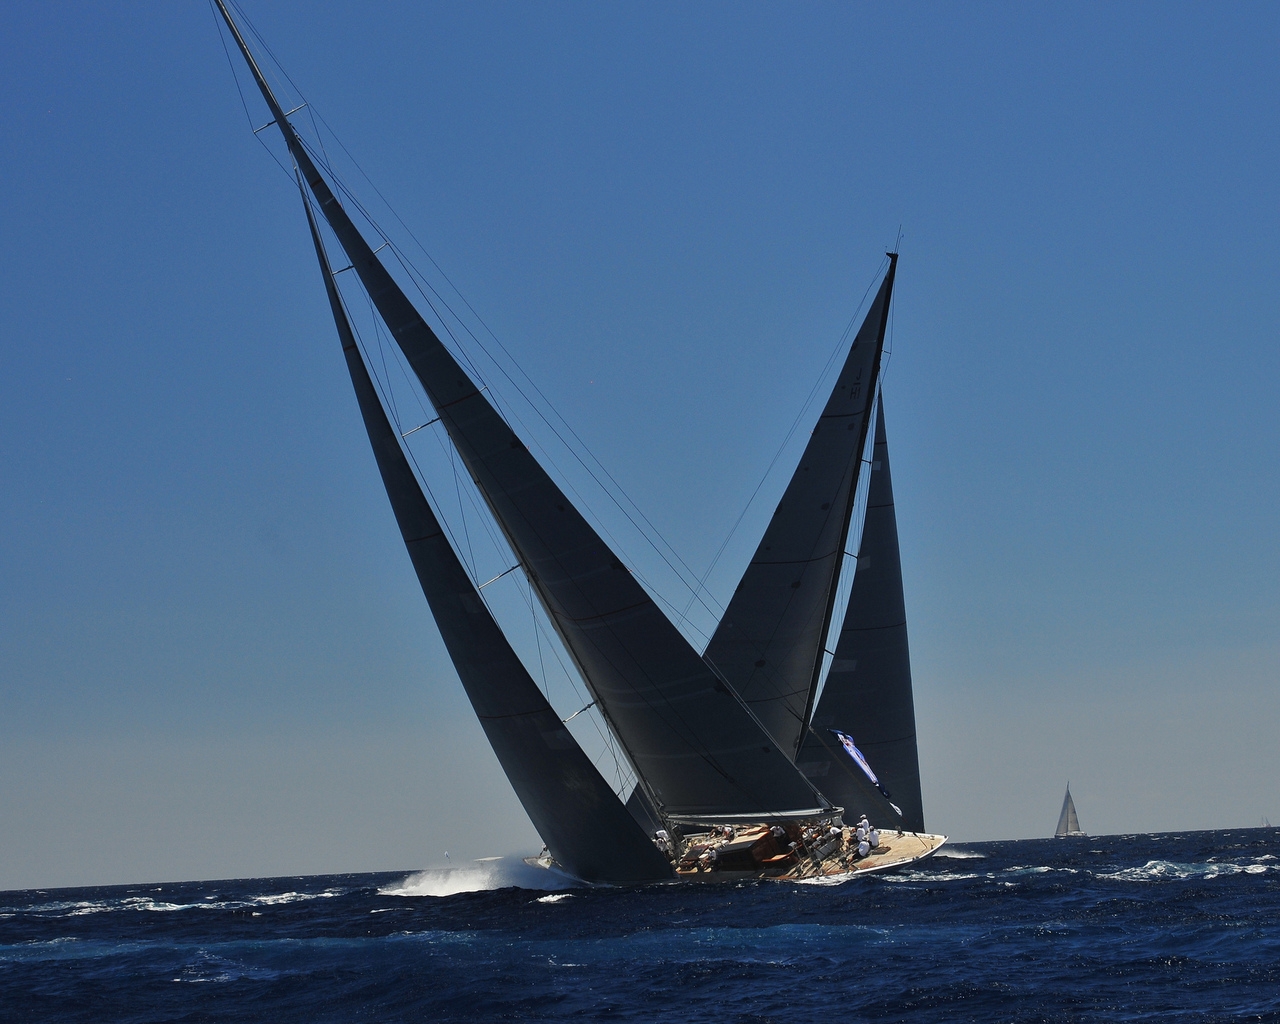 Sailing Yacht for 1280 x 1024 resolution